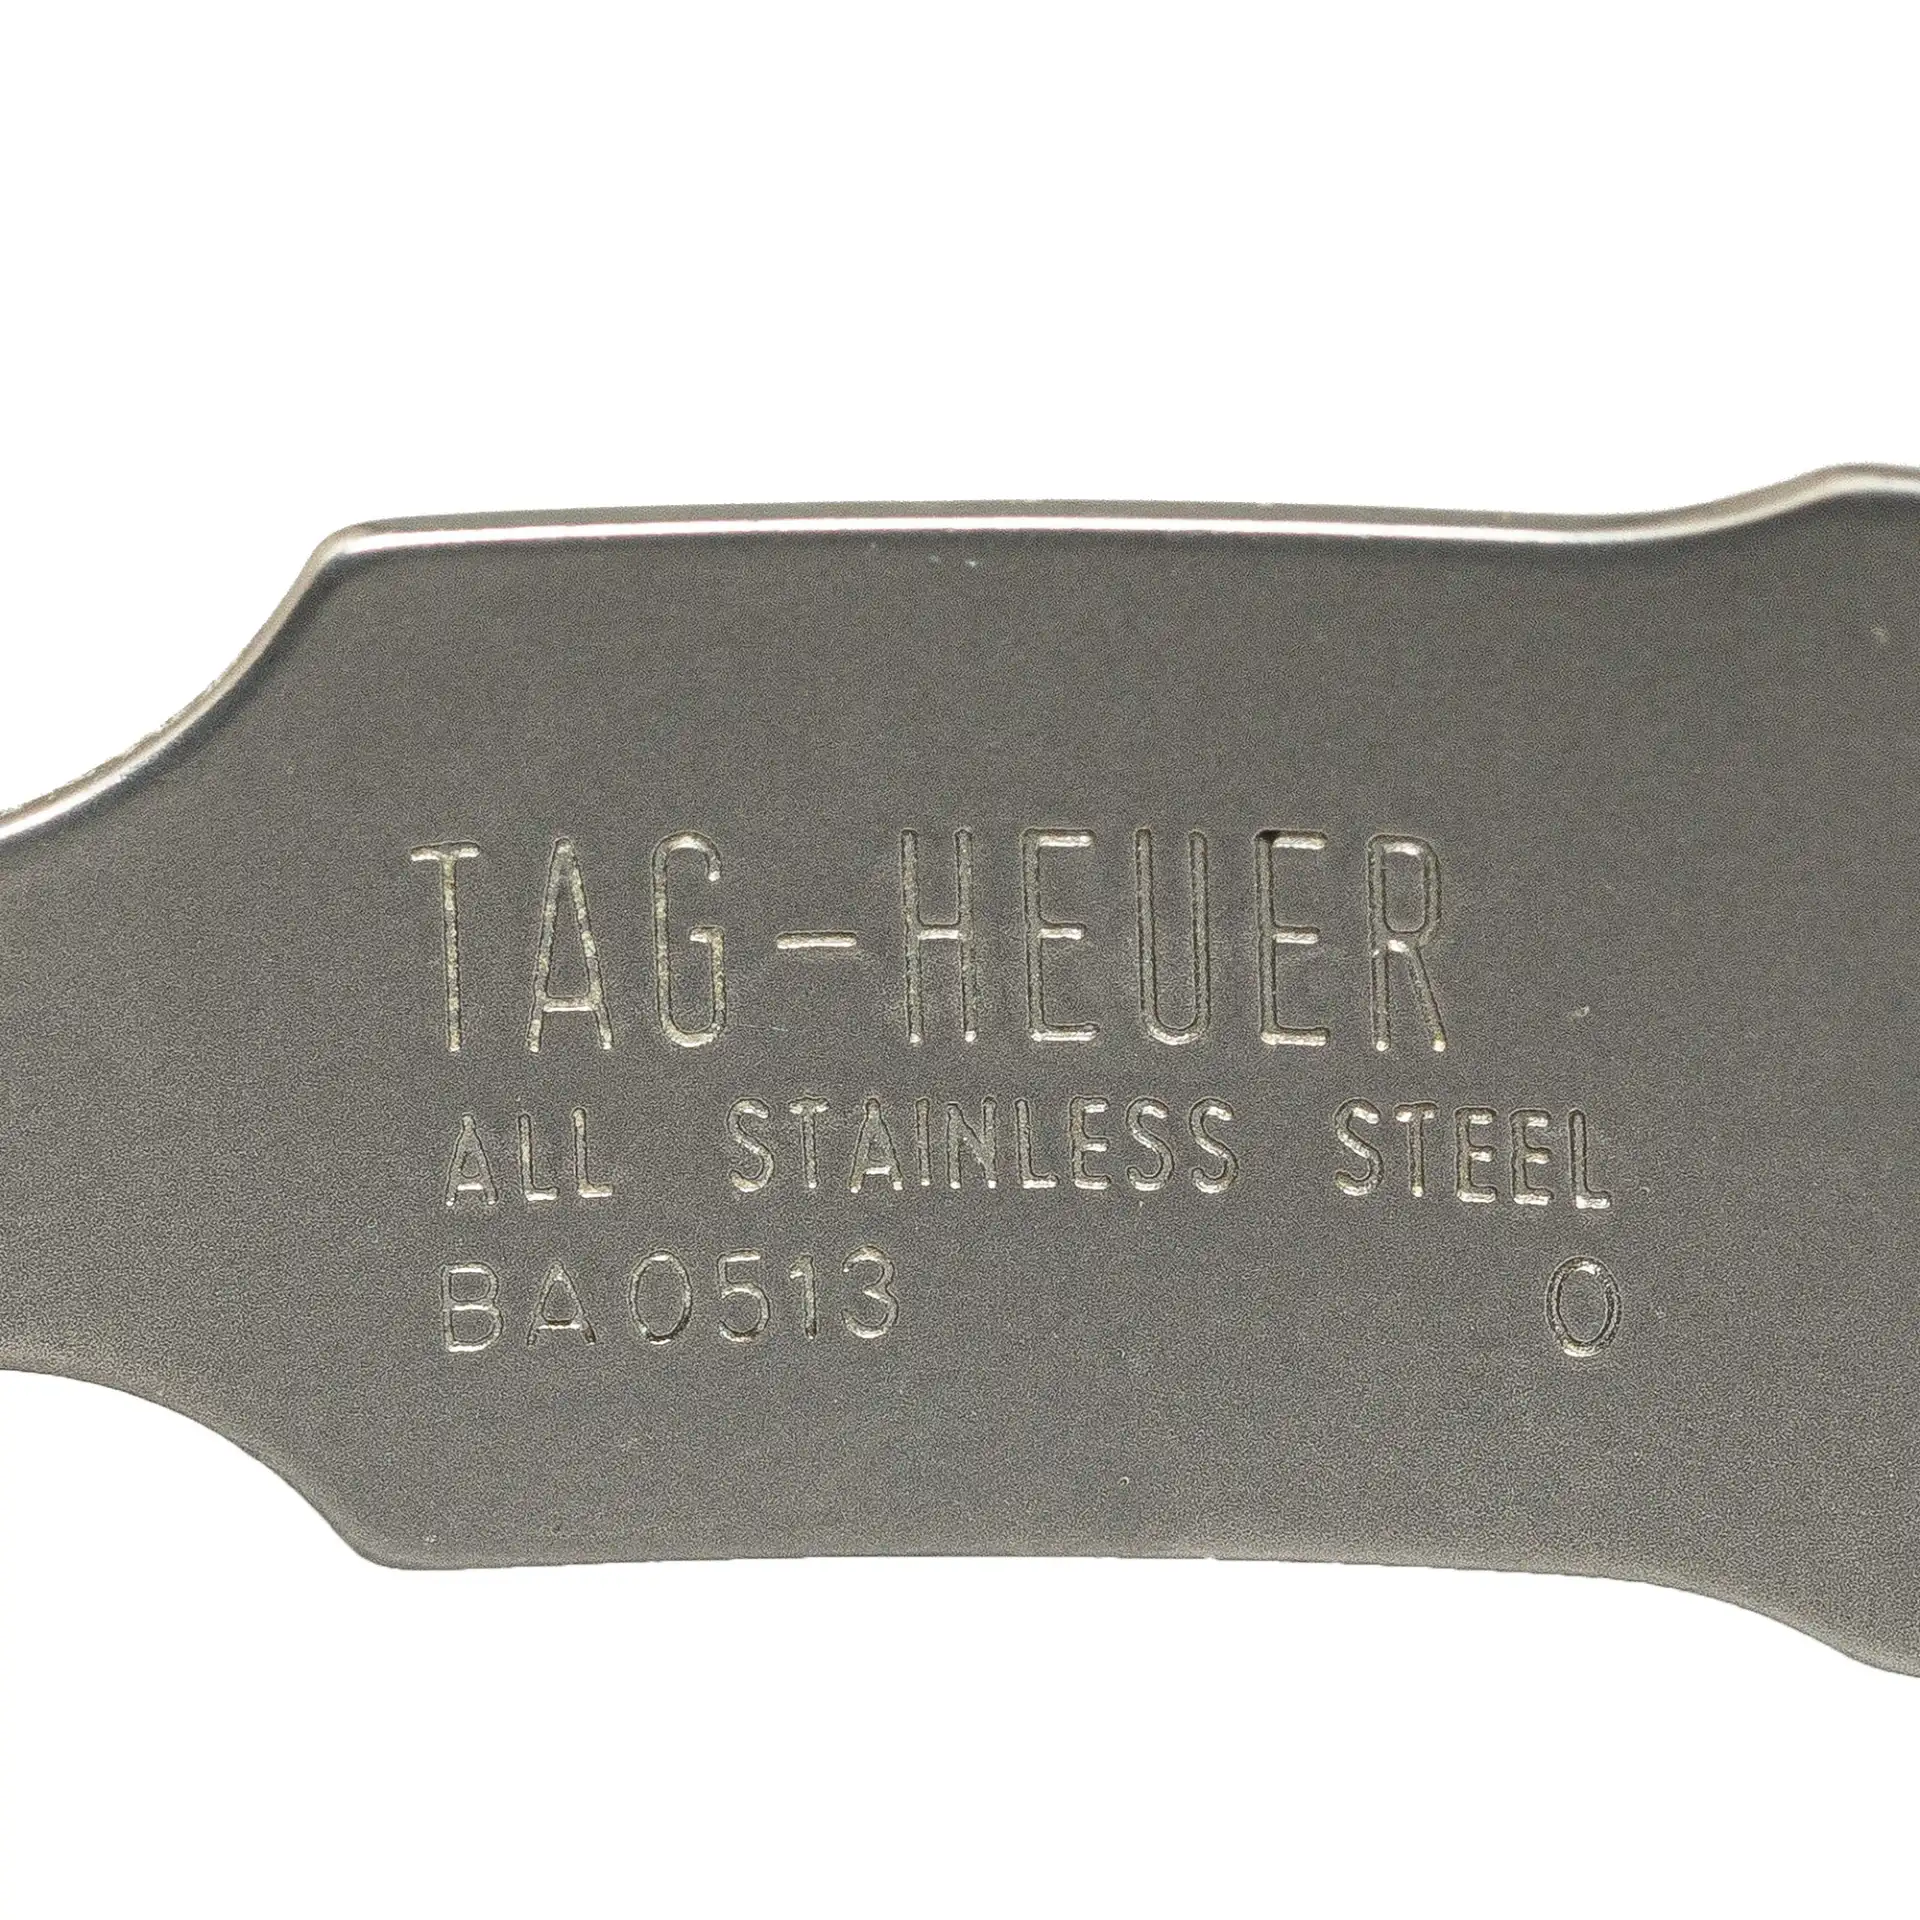 Tag Heuer Quartz Stainless Steel Professional Watch